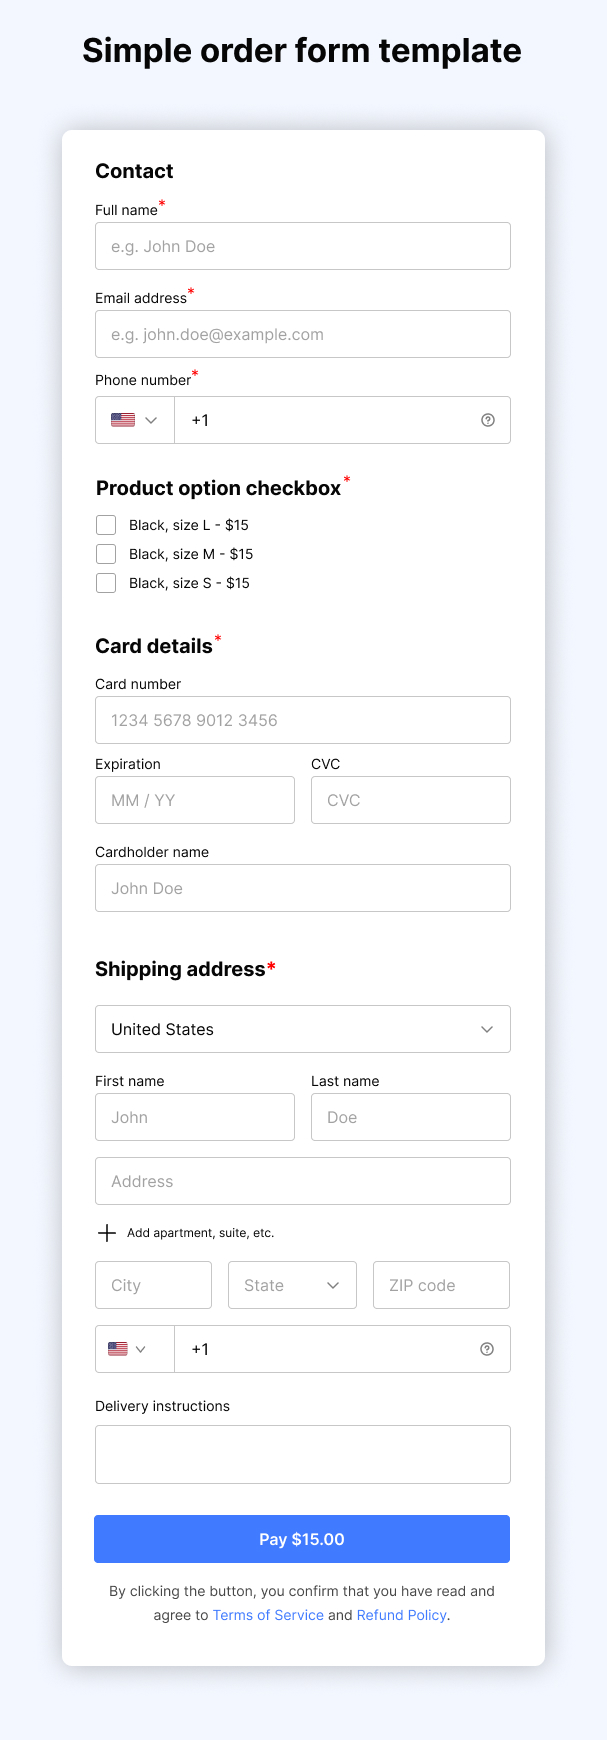 simple order form template example for t-short product